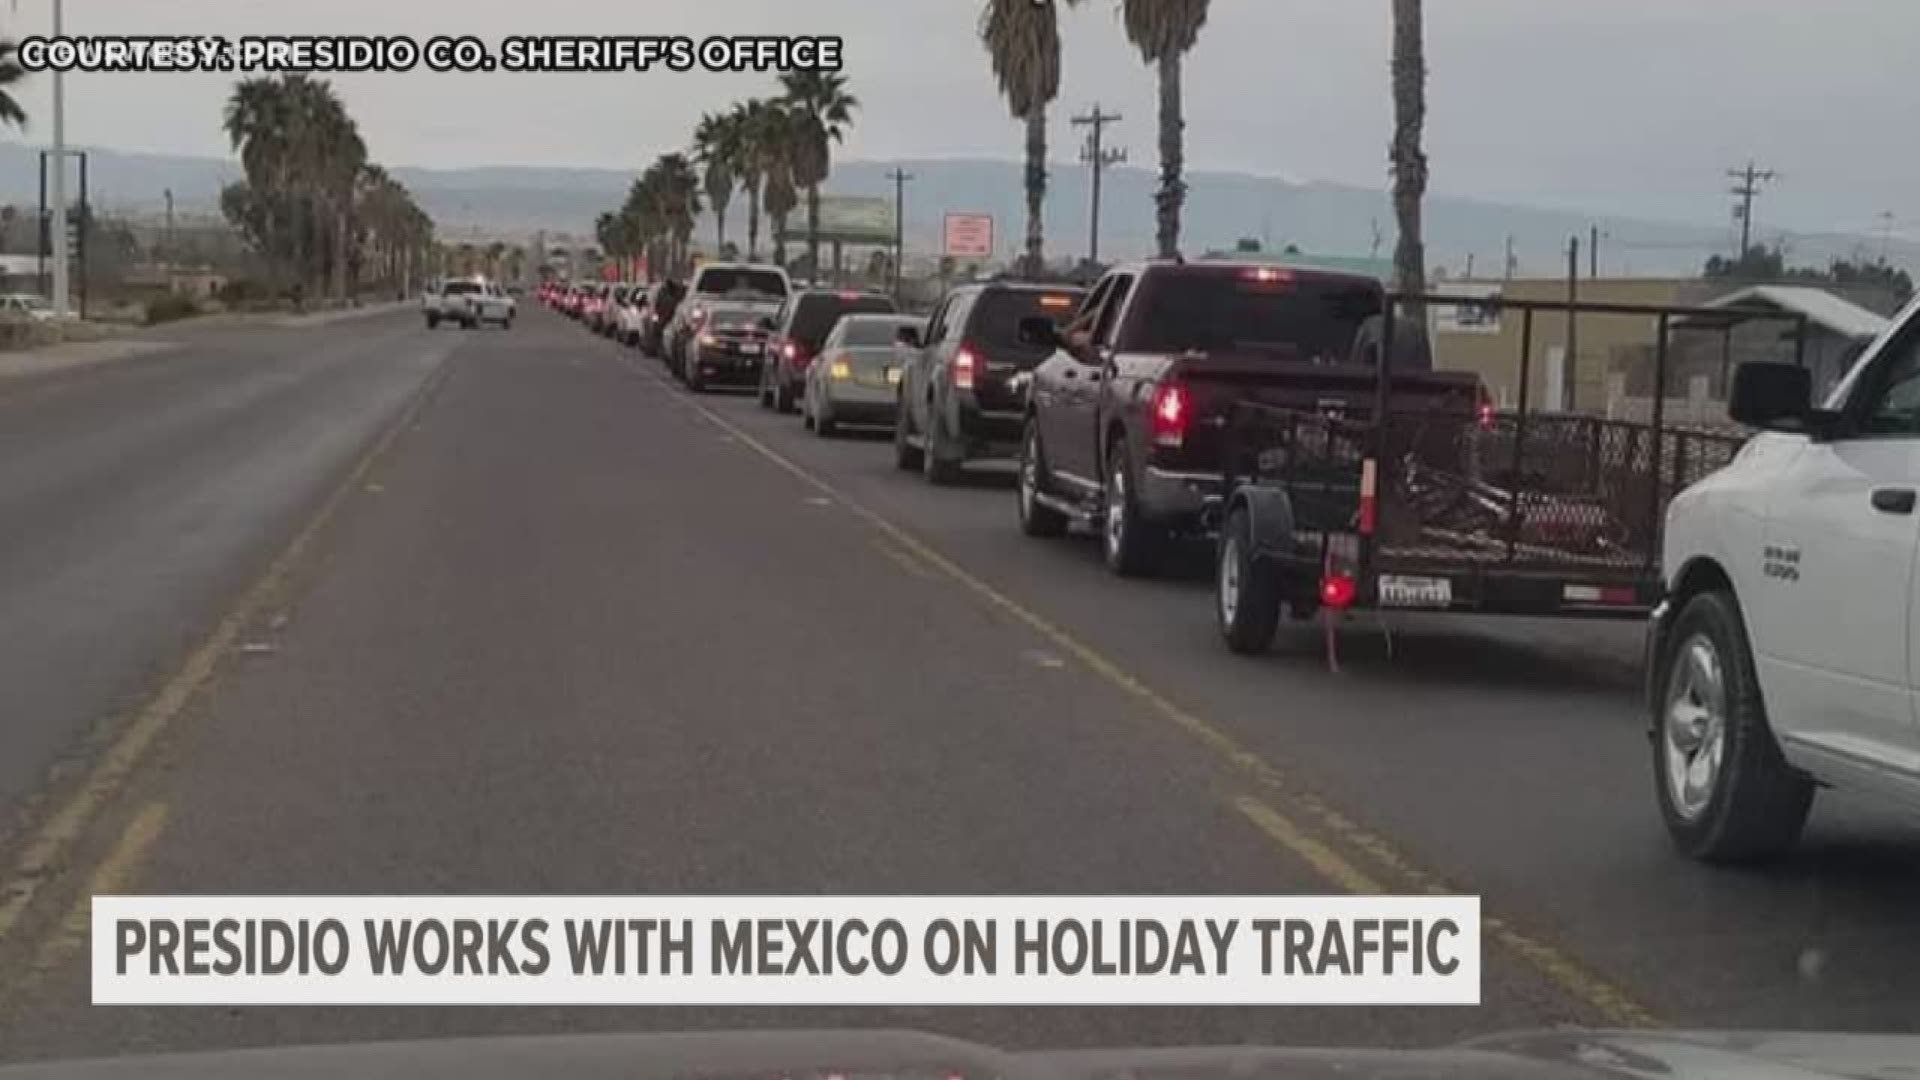 Officials warned those traveling to Mexico through Presidio should anticipate a long wait time.